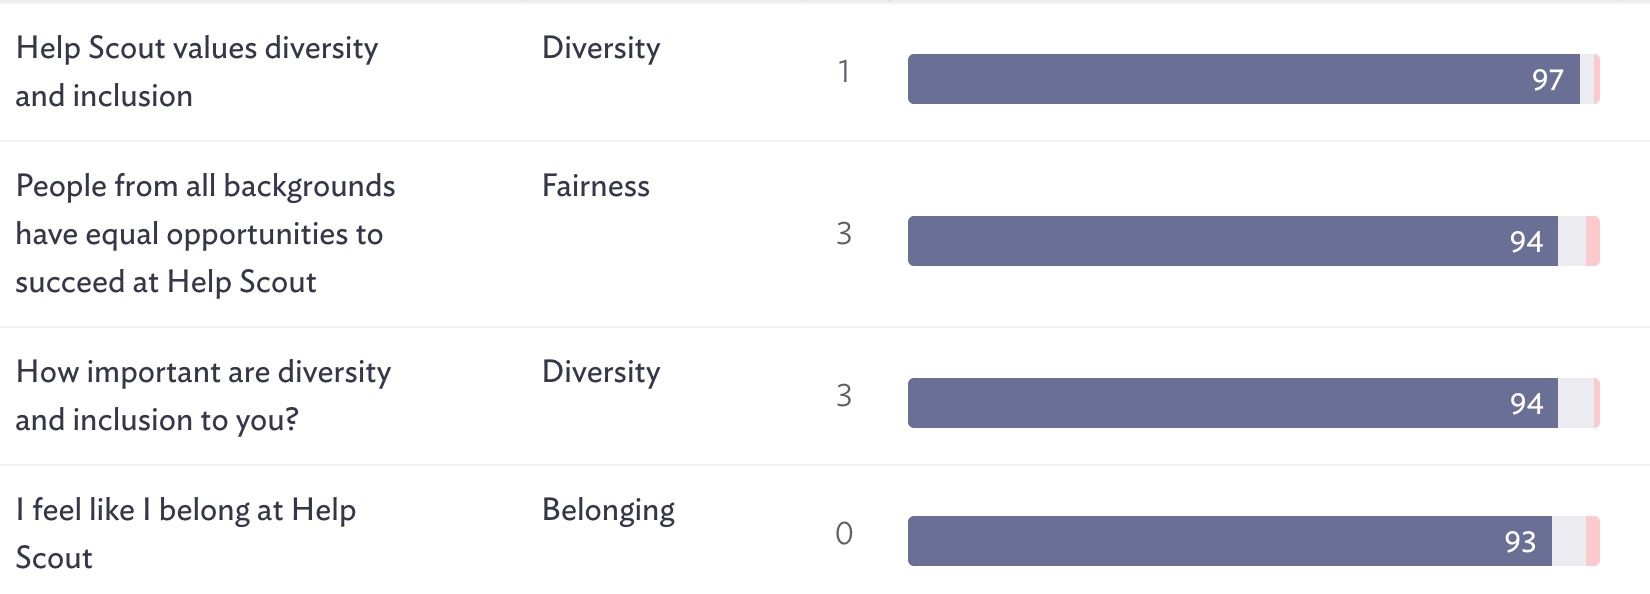 A snapshot of our scores around inclusion from October 2019